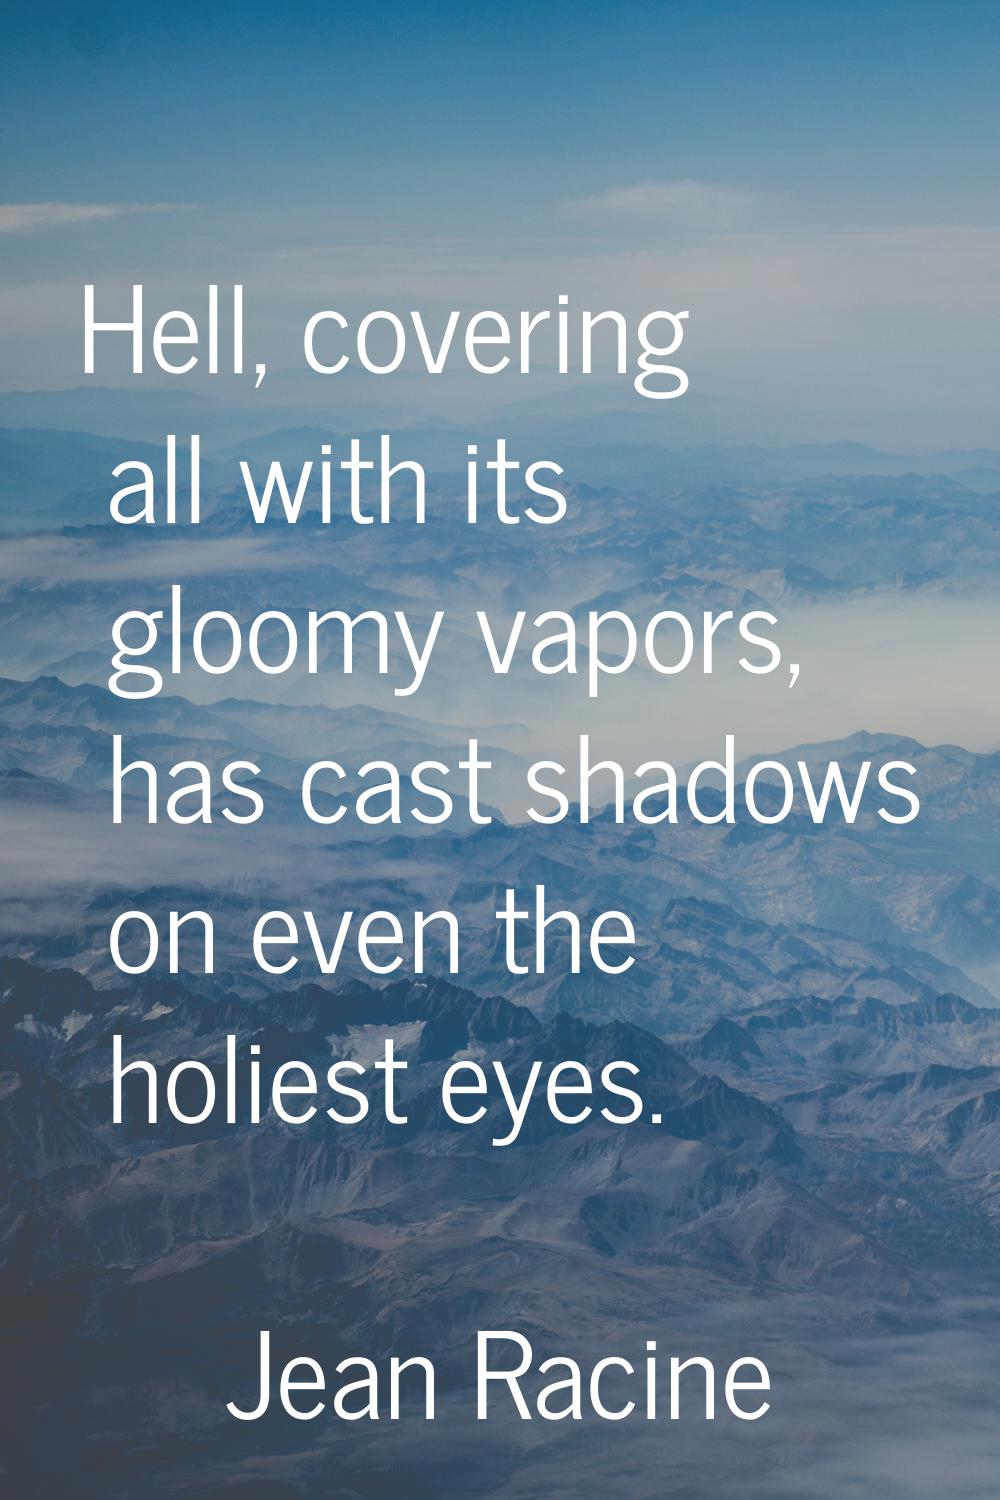 Hell, covering all with its gloomy vapors, has cast shadows on even the holiest eyes.